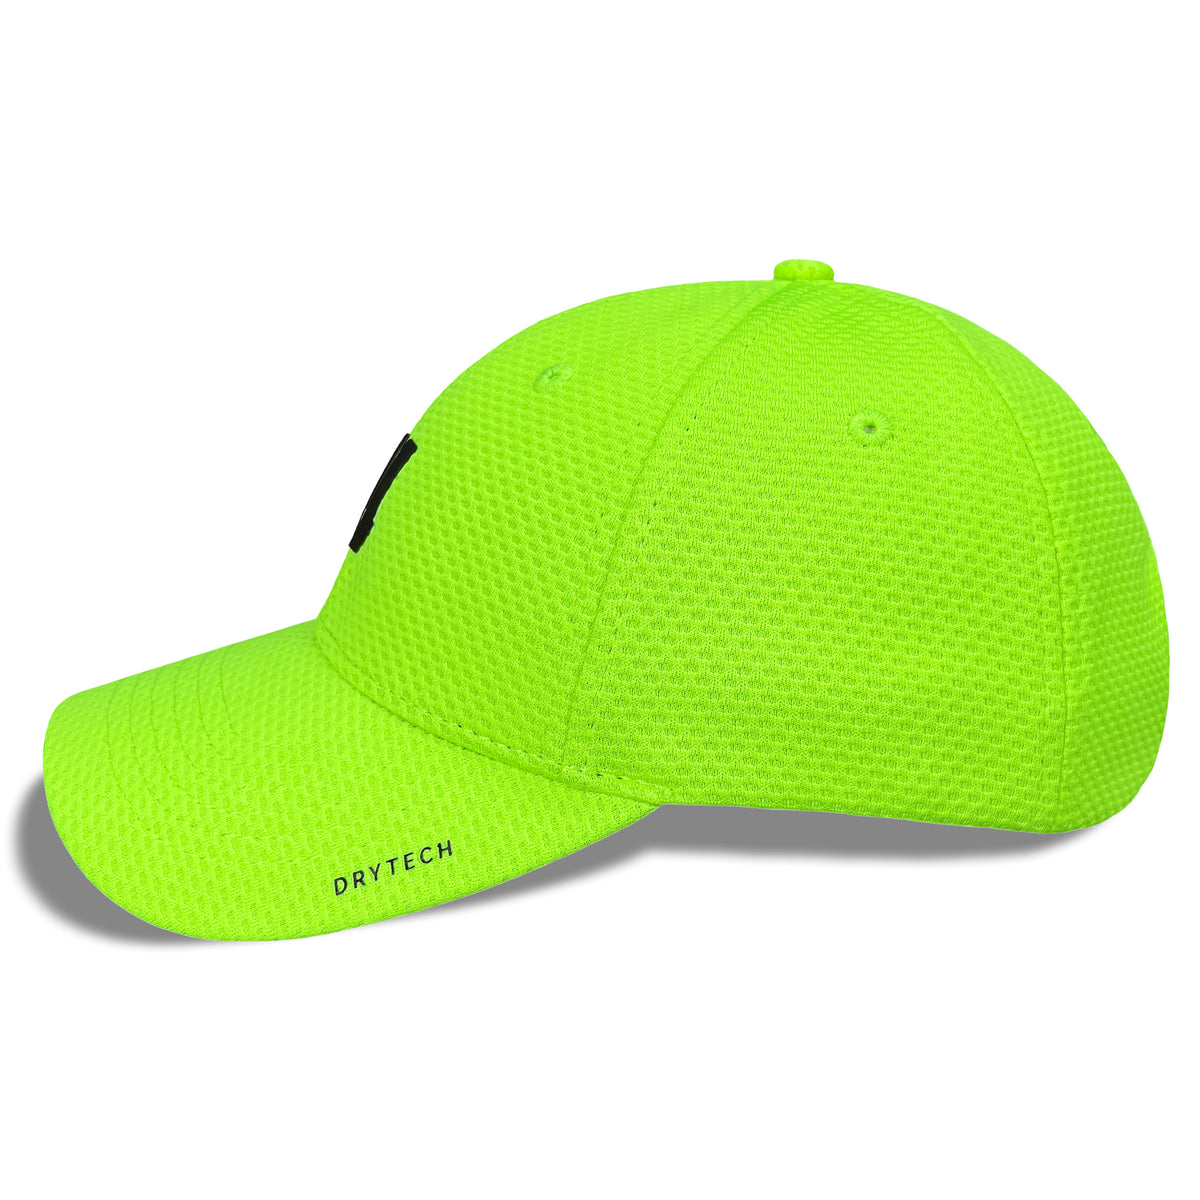  Workout Hats For Women